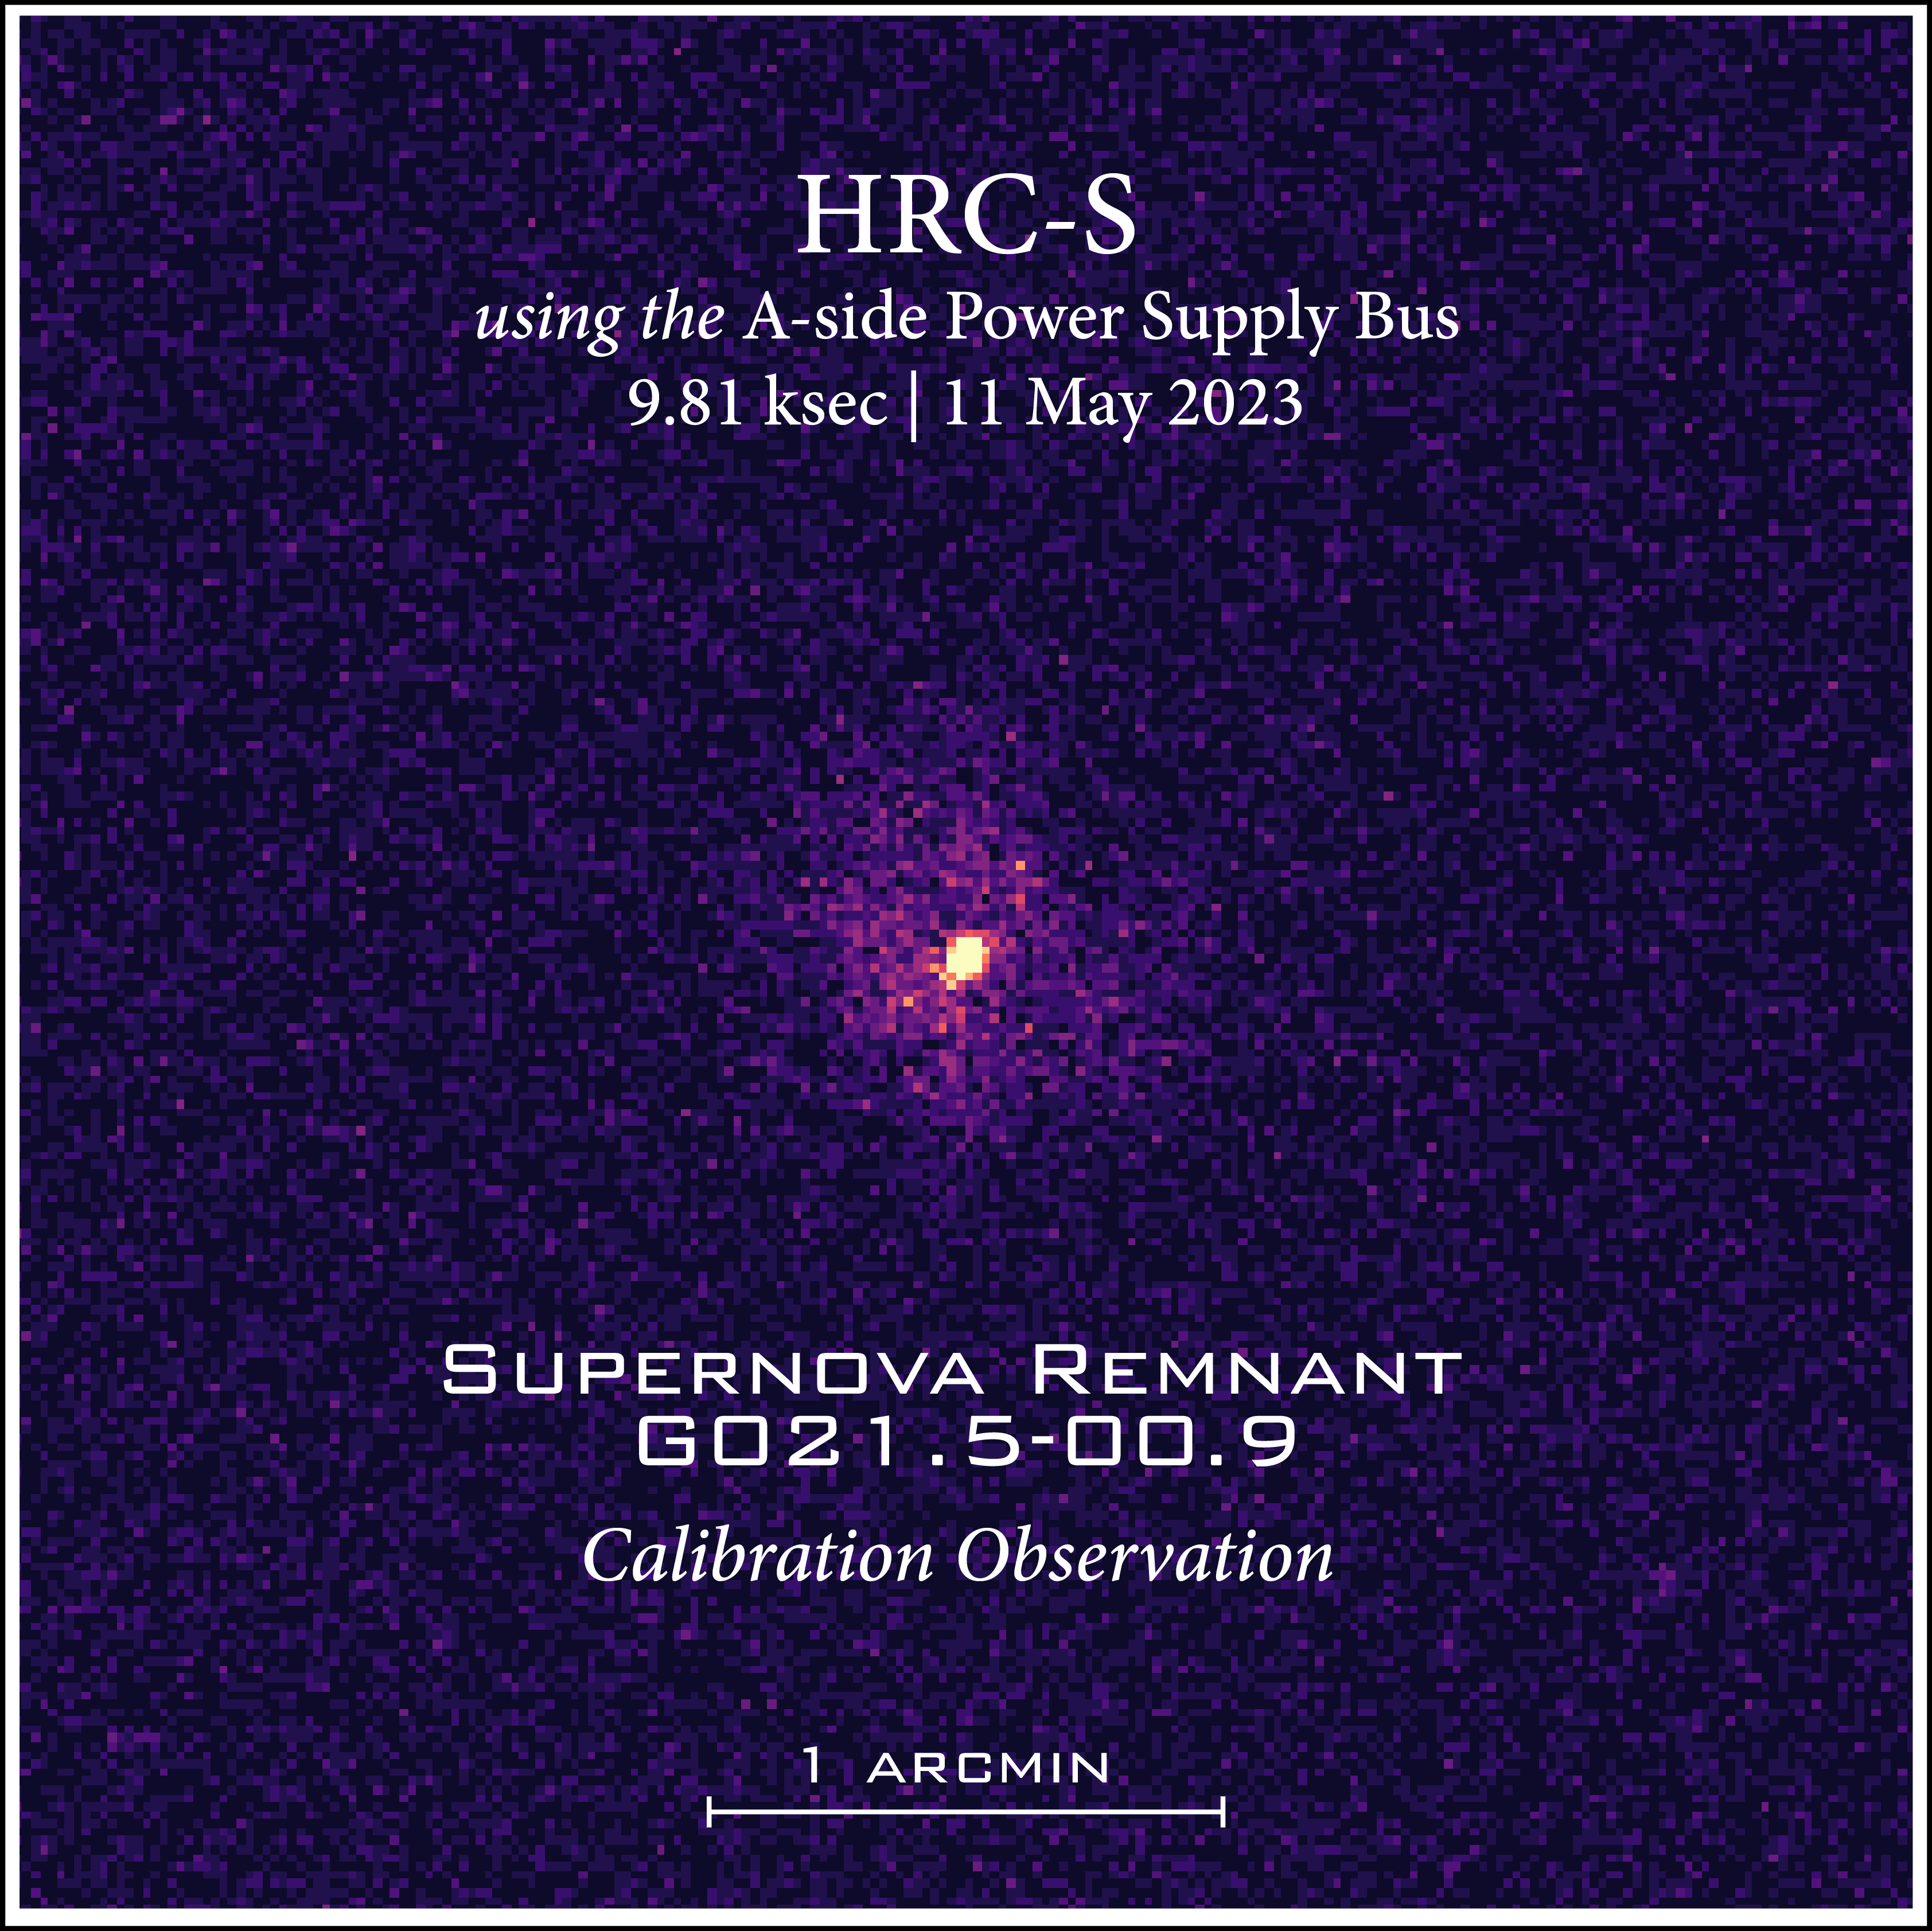 Astronomical image of a central bright source with a fainter cloud around it, displayed in a purple-to-yellow colormap. Labels at the top and bottom state that this is a calibration observation of supernova remnant G 021.5 minus 00.9 with the A-Side power supply bus on HRC-S.